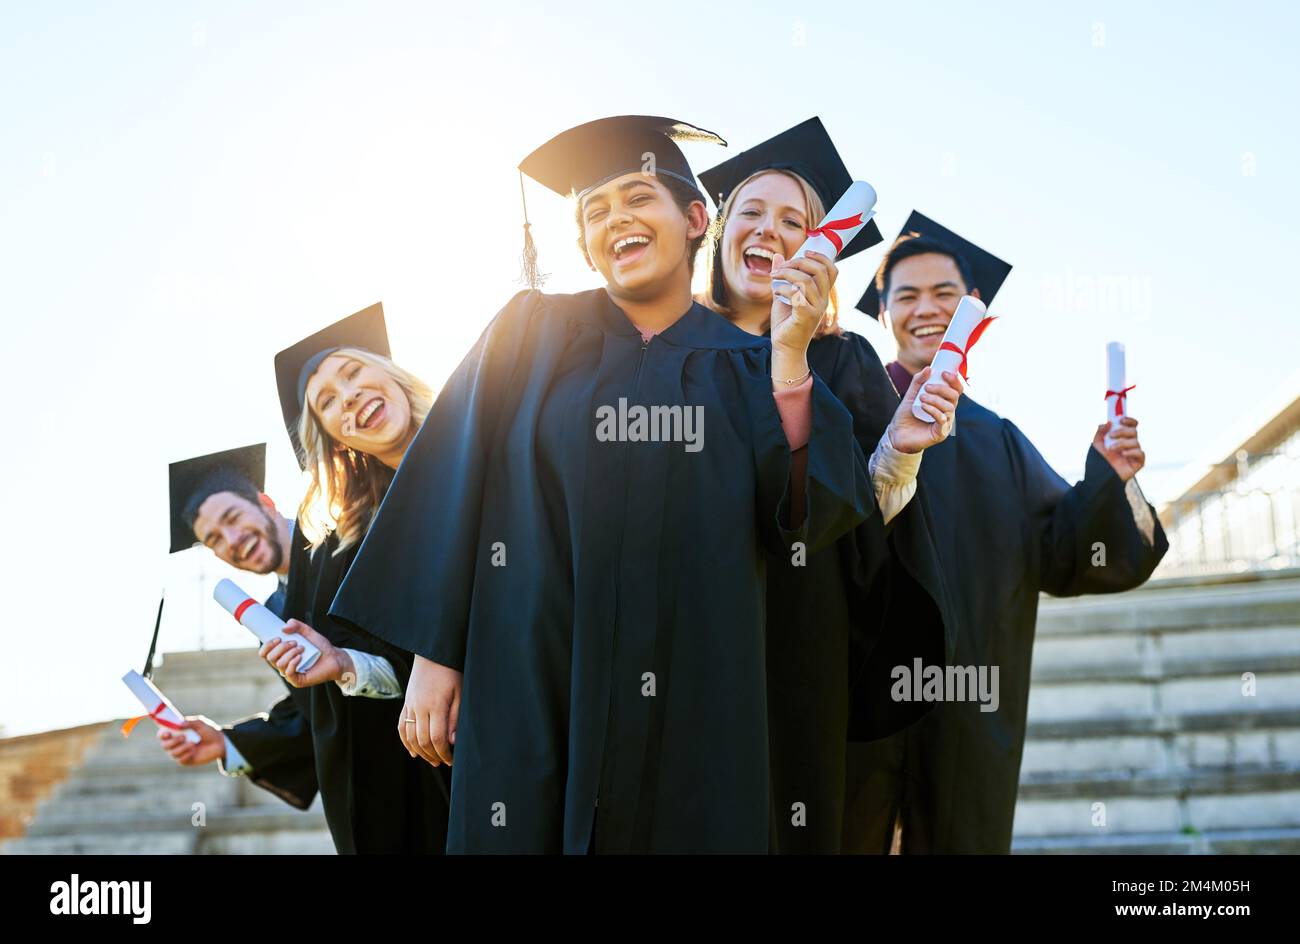 Ready for the real world. Portrait of a group of students holding their diplomas on graduation day. Stock Photo